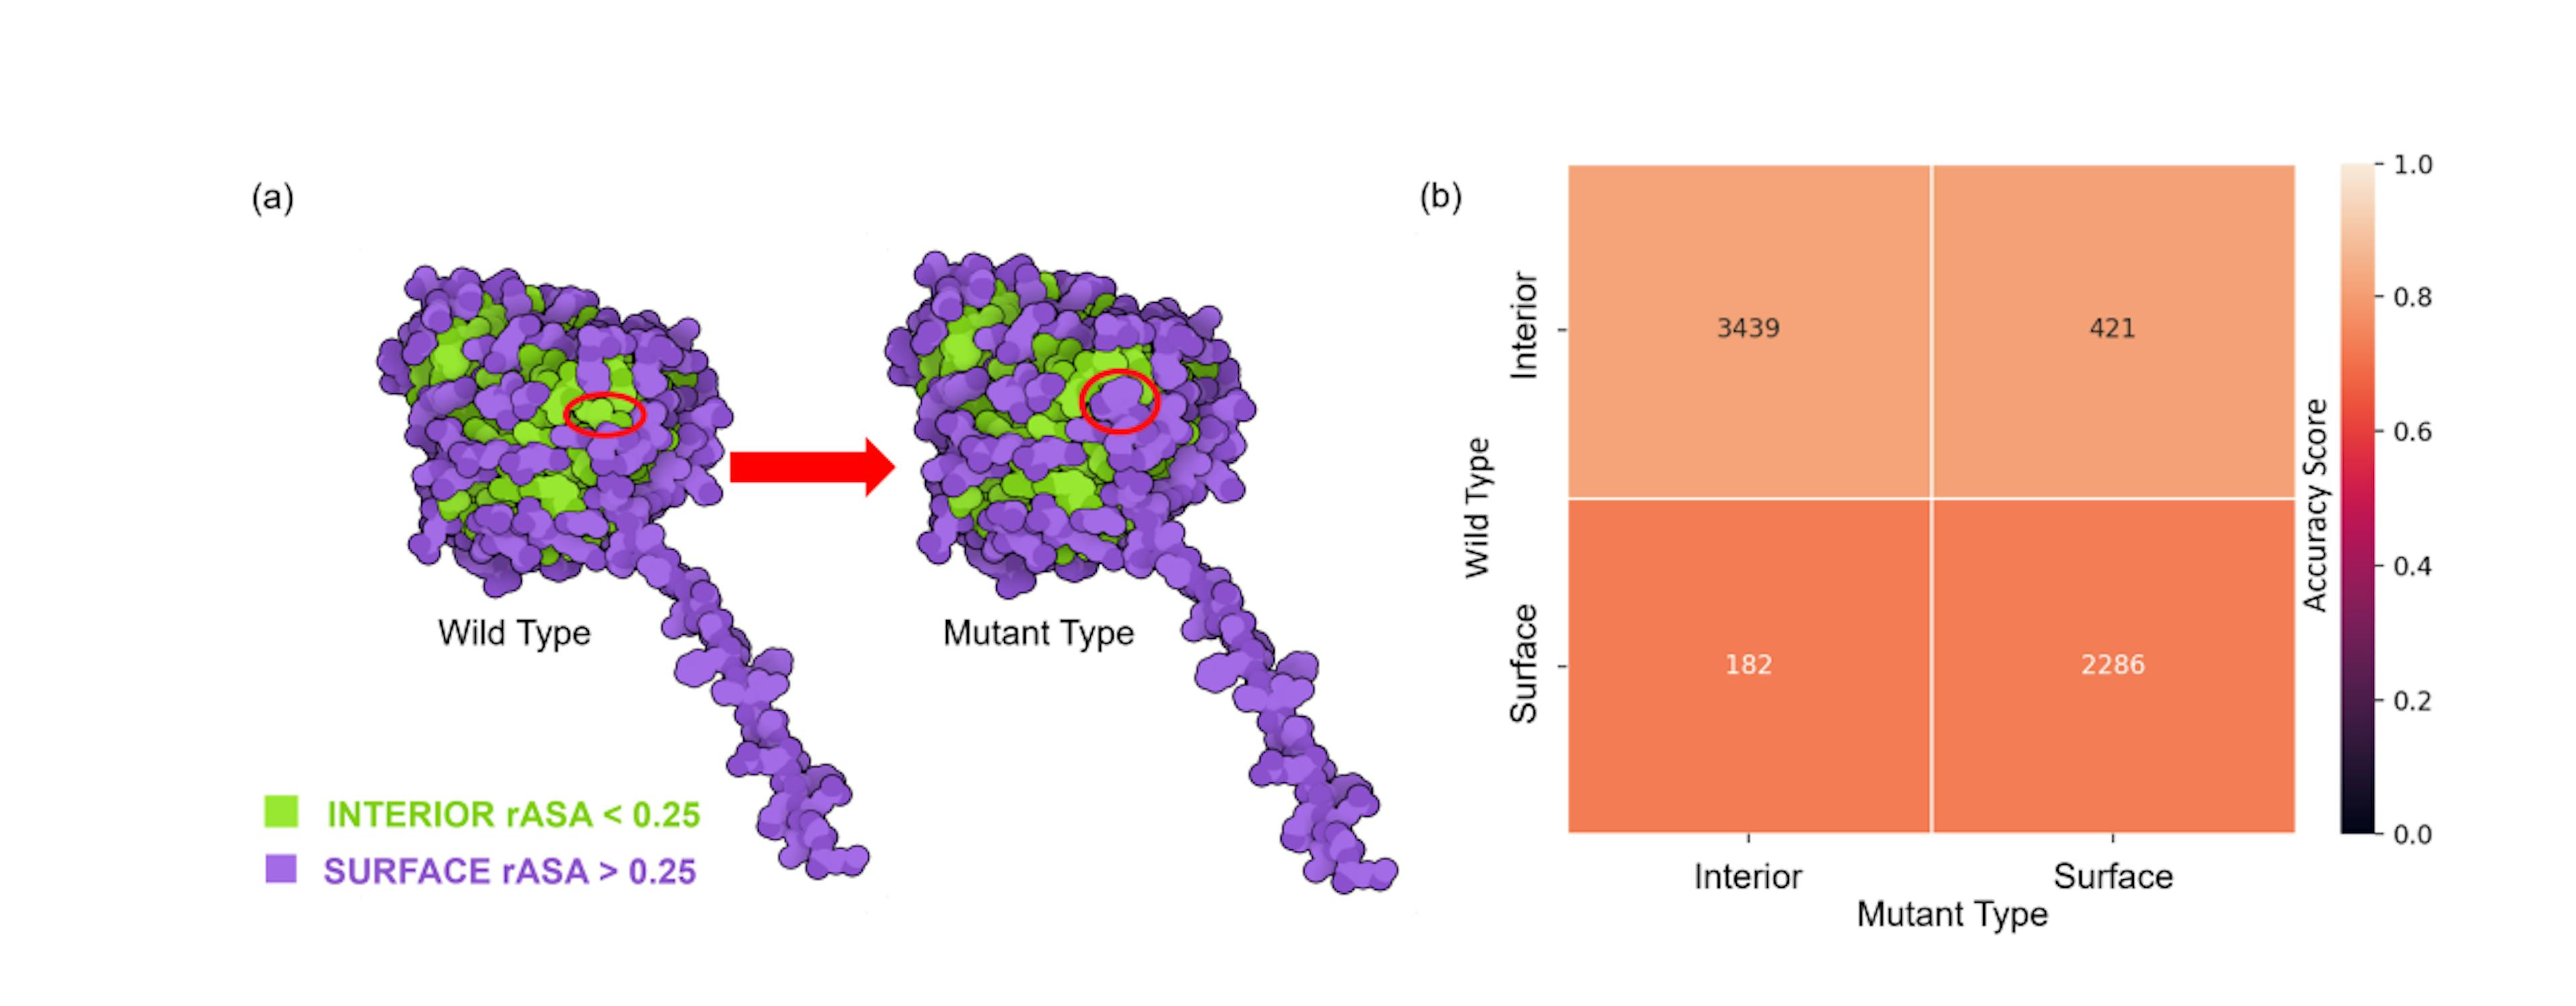 Figure 2: (a) The definitions of the structural regions on the protein label 213133708 with mutation ID: I283W. For both wild type and mutant type, amino acids in the proteins are classified under surface or interior regions based on the rASA of the residue. The residue ID 283 of protein label 213133708 was mutated from isoleucine (interior region) to trytophan (surface region). Structures are plotted with the software Illustrate[42]. (b) A comparison of performance of TopLapGBT among different mutation region types. The y-axis represents the region type for the original residue and the x-axis represents the region type for the mutated residue. The numbers indicated in each cell corresponds to the number of mutation samples in each regionregion mutation pair. The accuracy scores (CPR) for both interior-interior and interior-surface are 0.813 and 0.812 while the accuracy score for both surface-interior and surface-surface are 0.725 and 0.730.